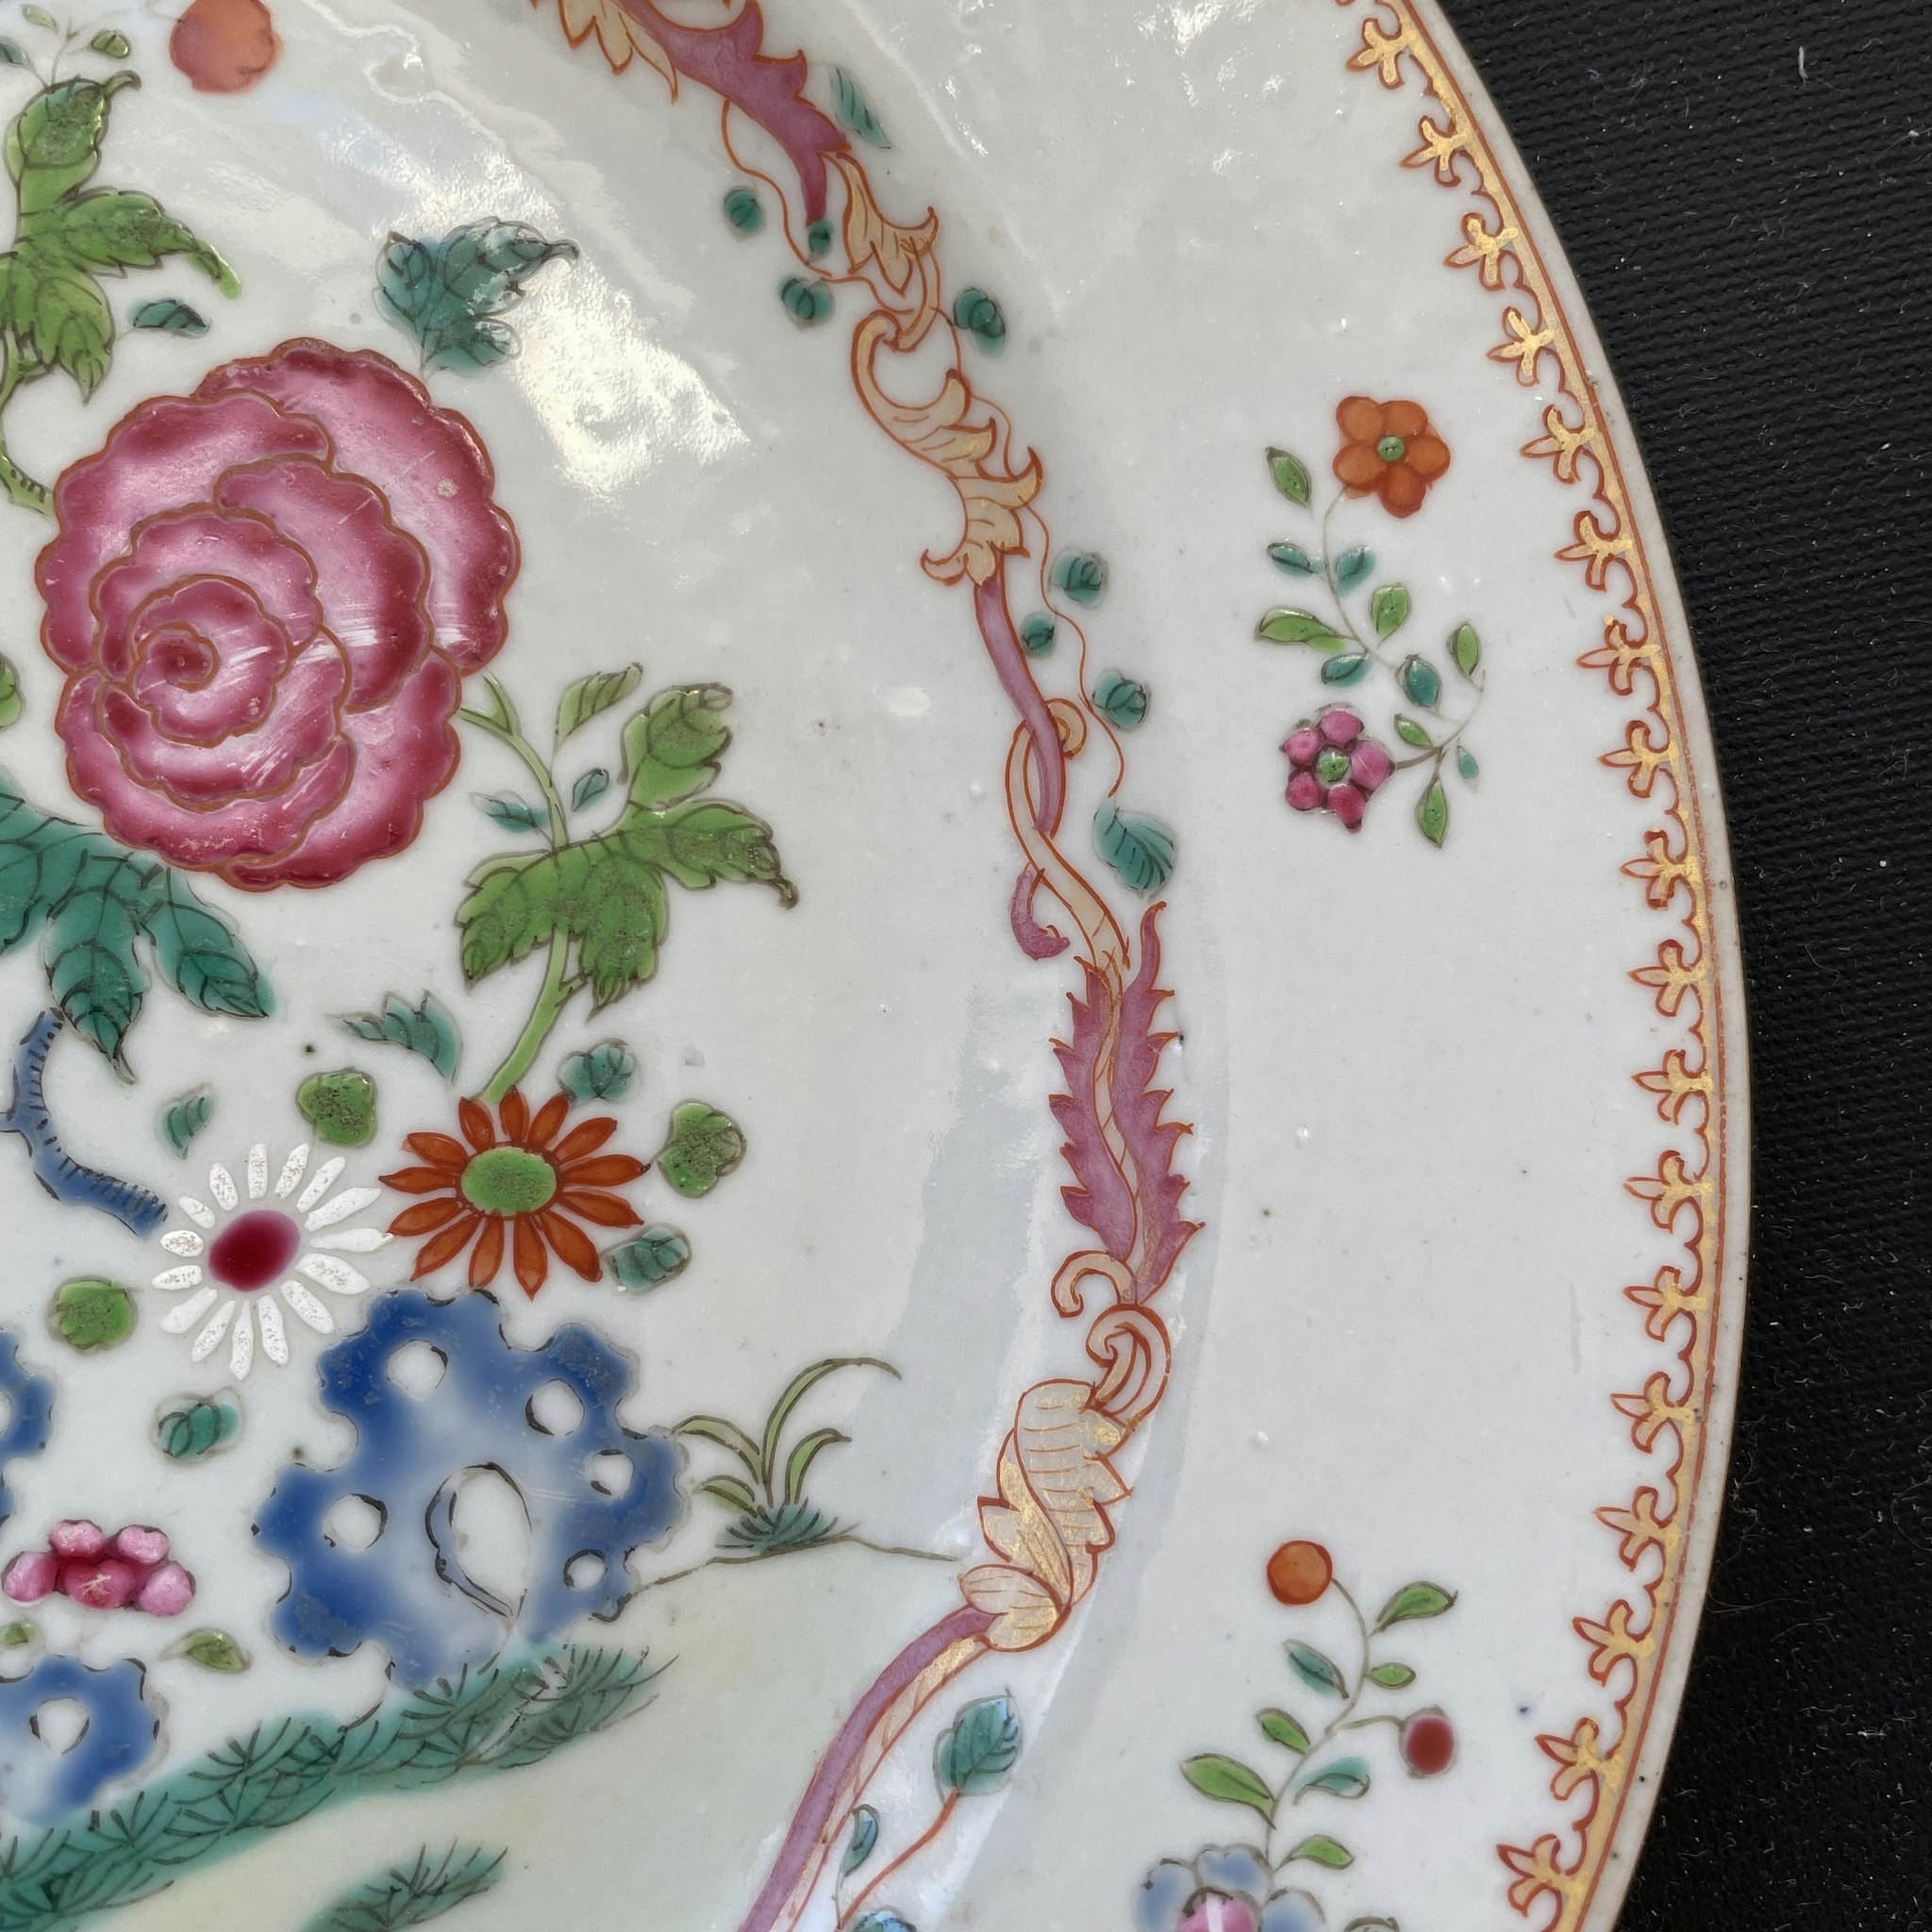 Chinese Antique famille rose porcelain Plate, Qianlong Period #1777